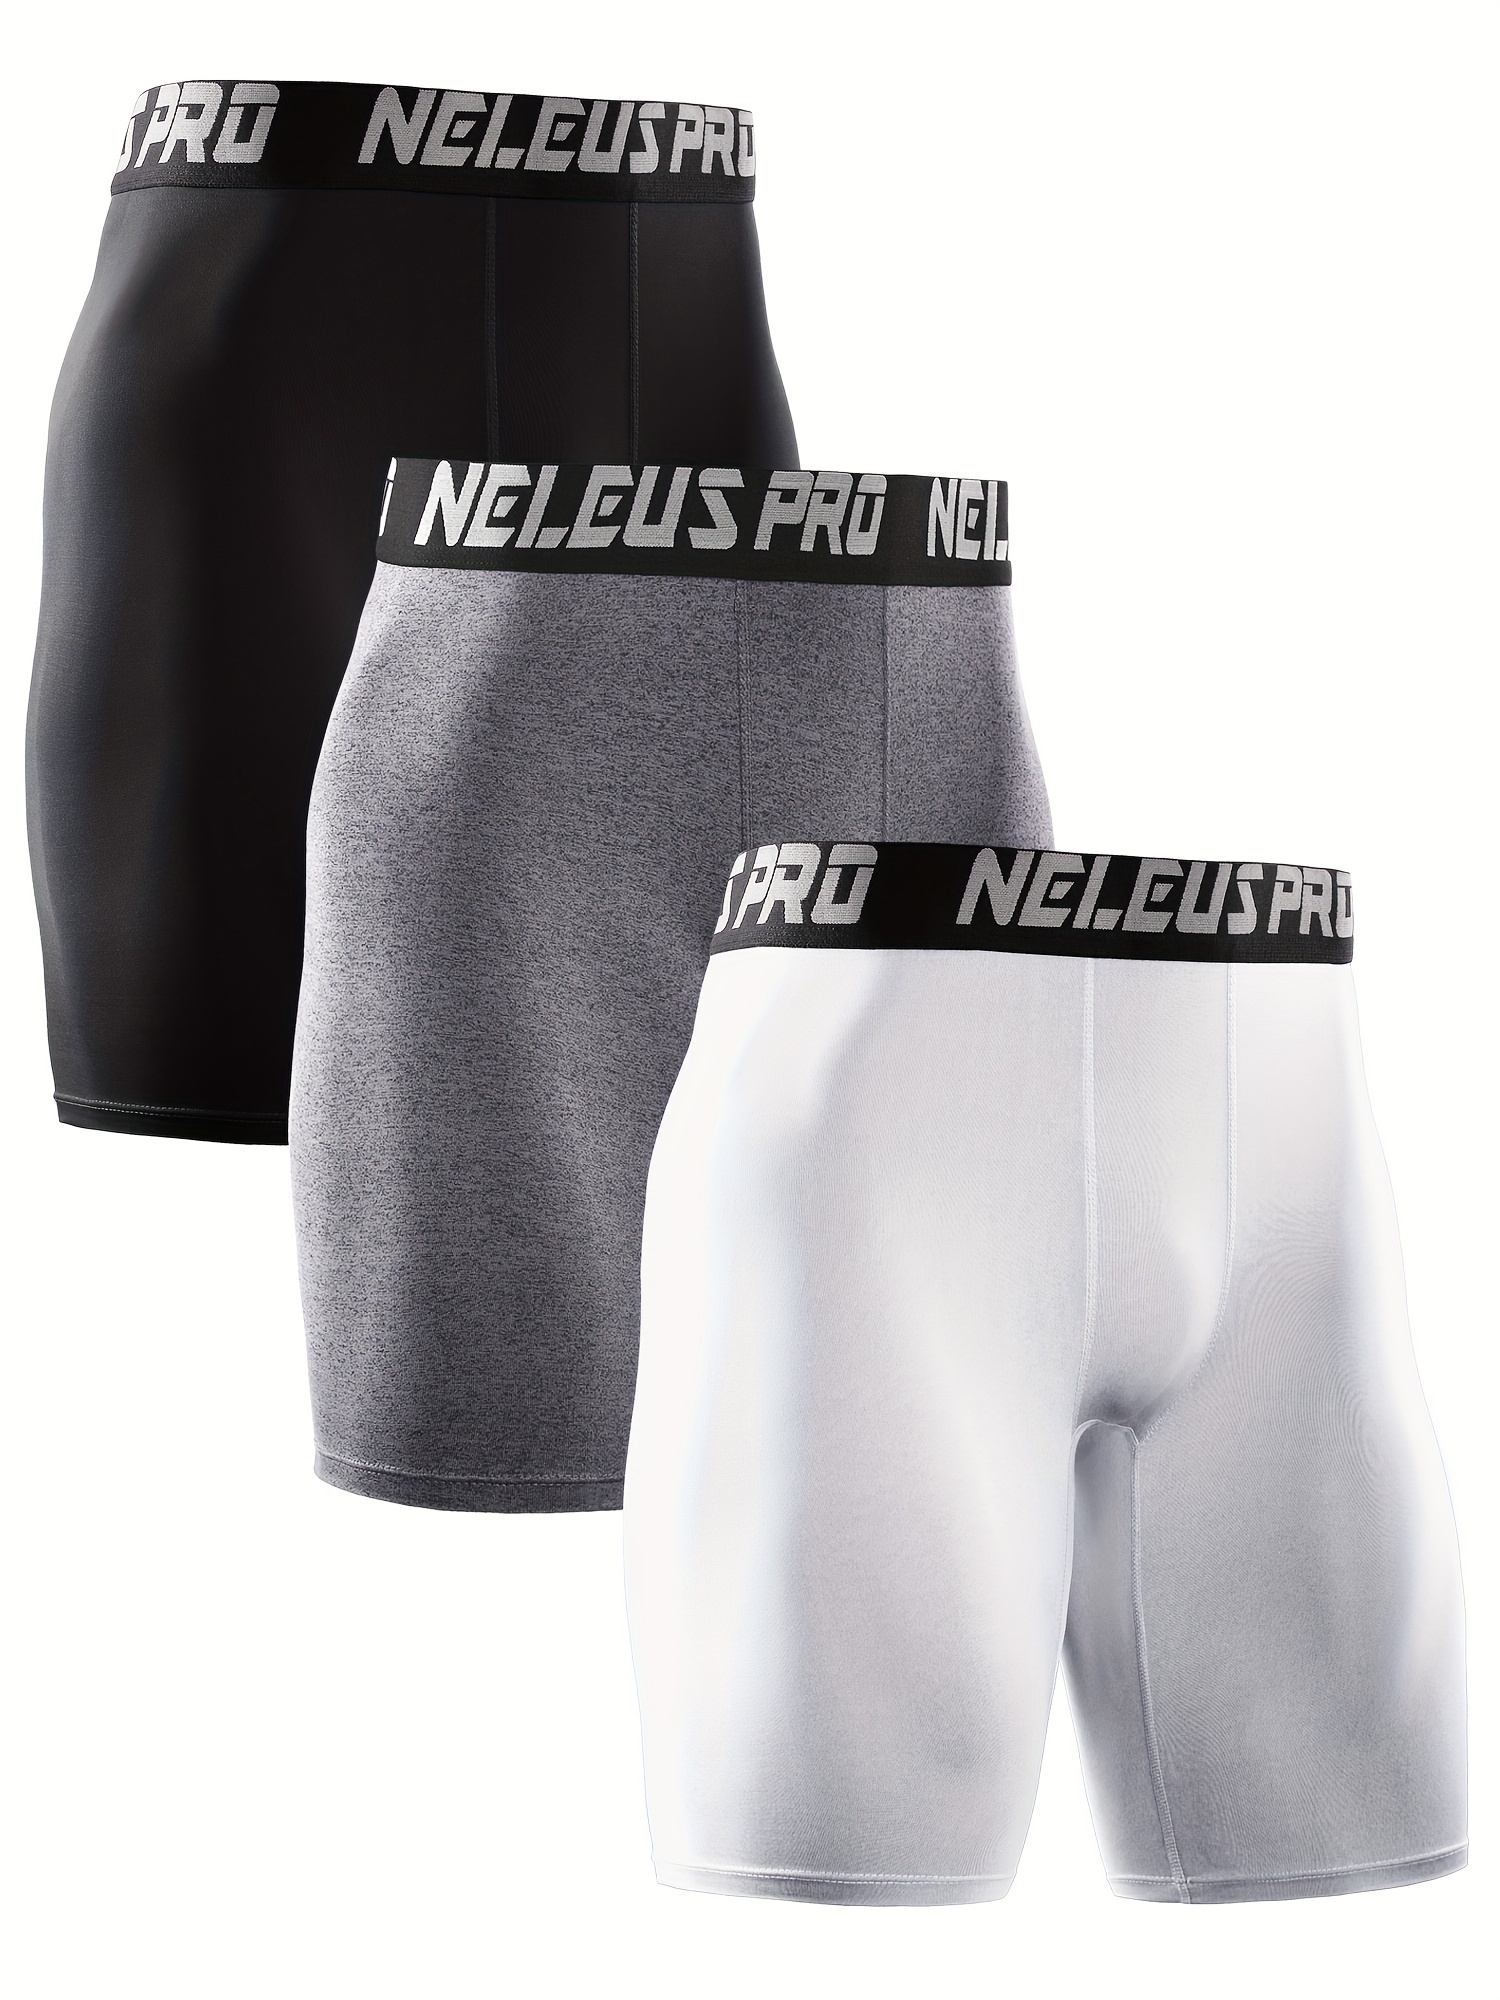 Buy Neleus Men's 2 Pack Compression Pants Sports Workout Running